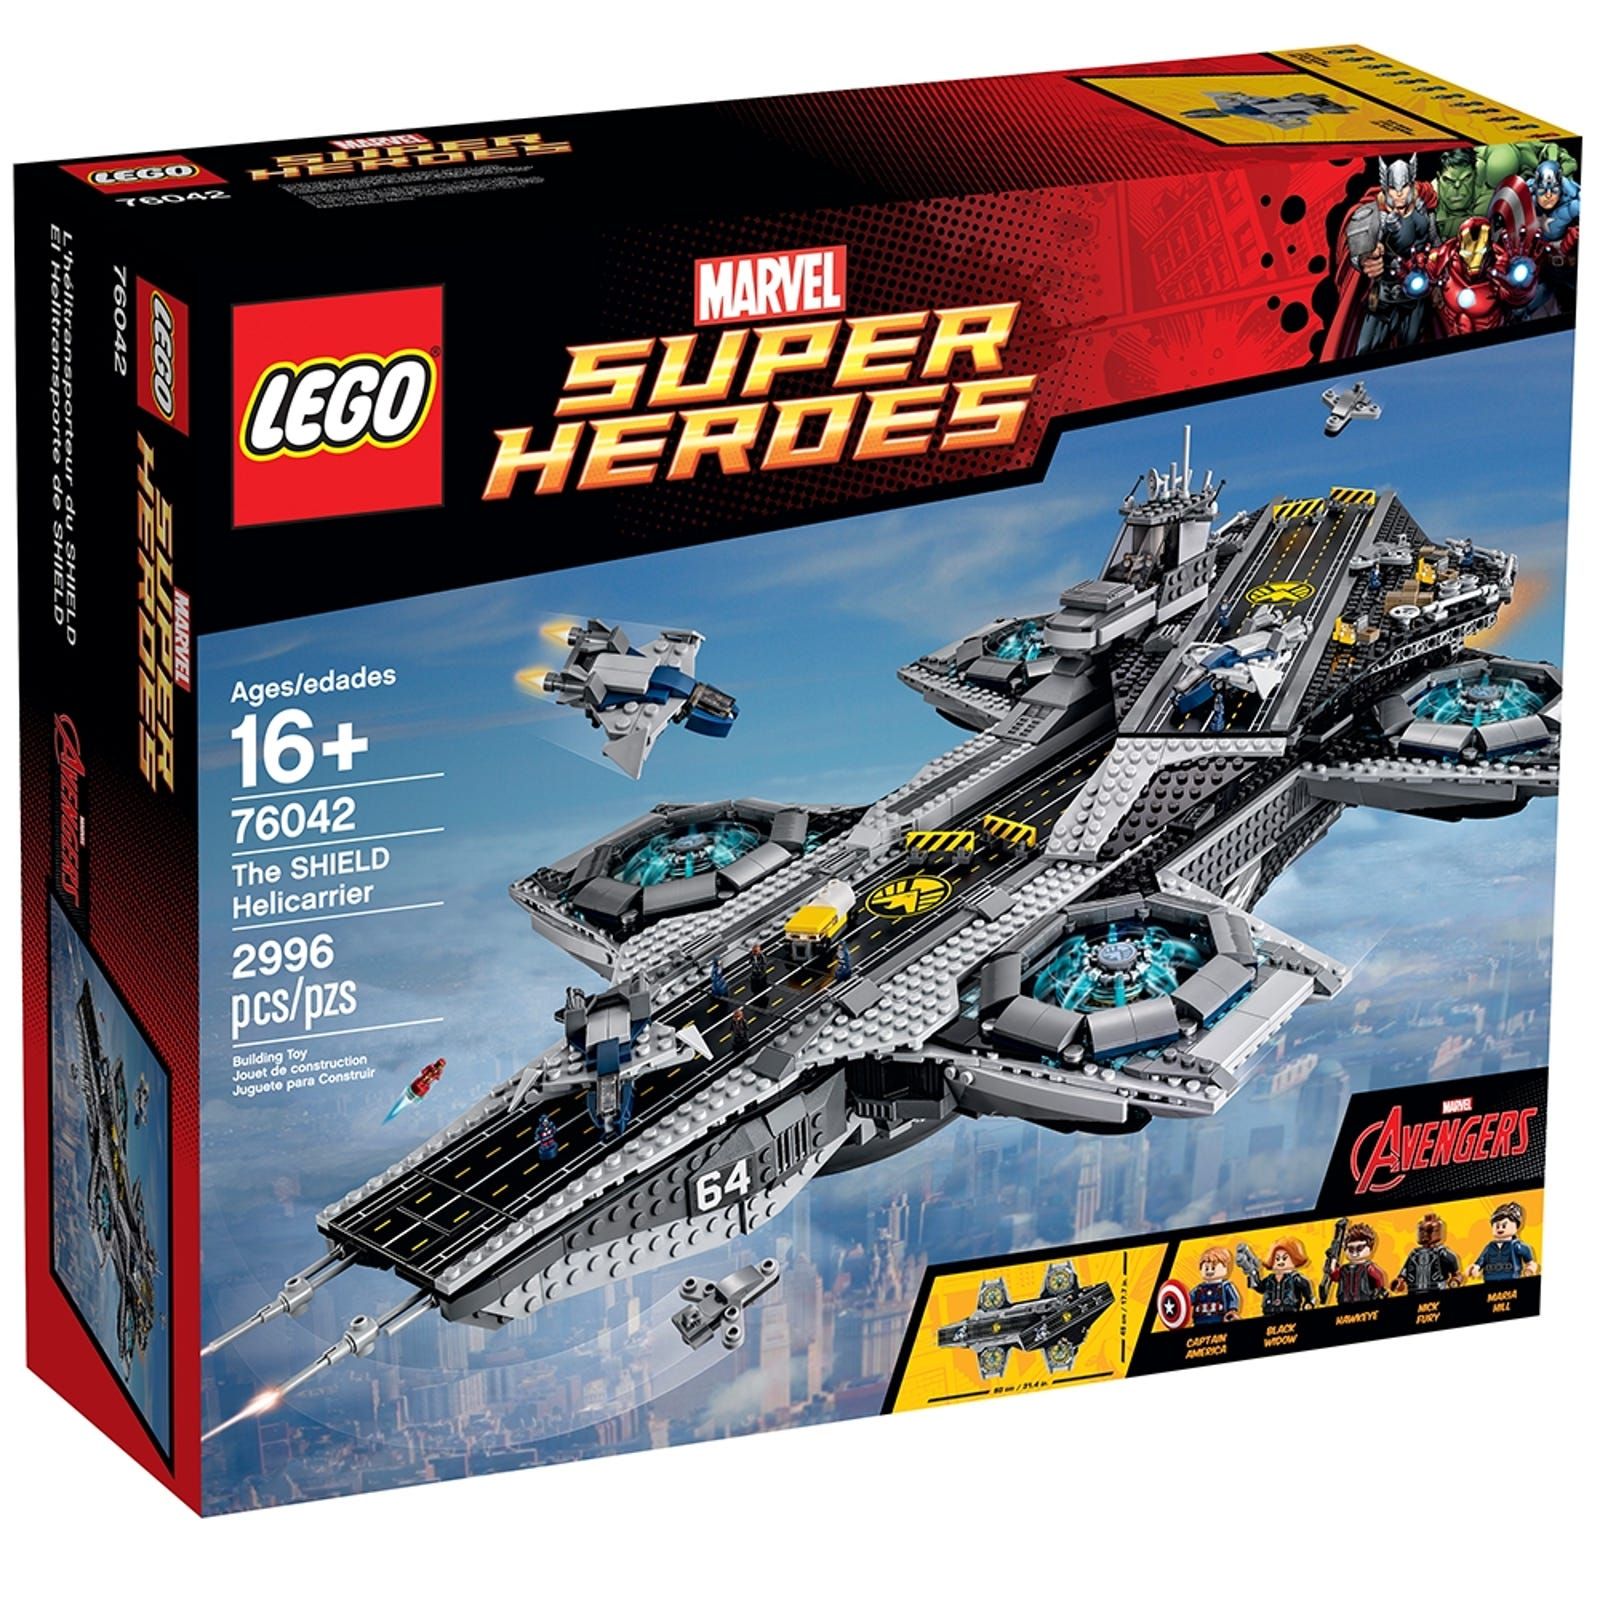 LEGO Marvel Super Heroes 76042 The SHIELD Helicarrier